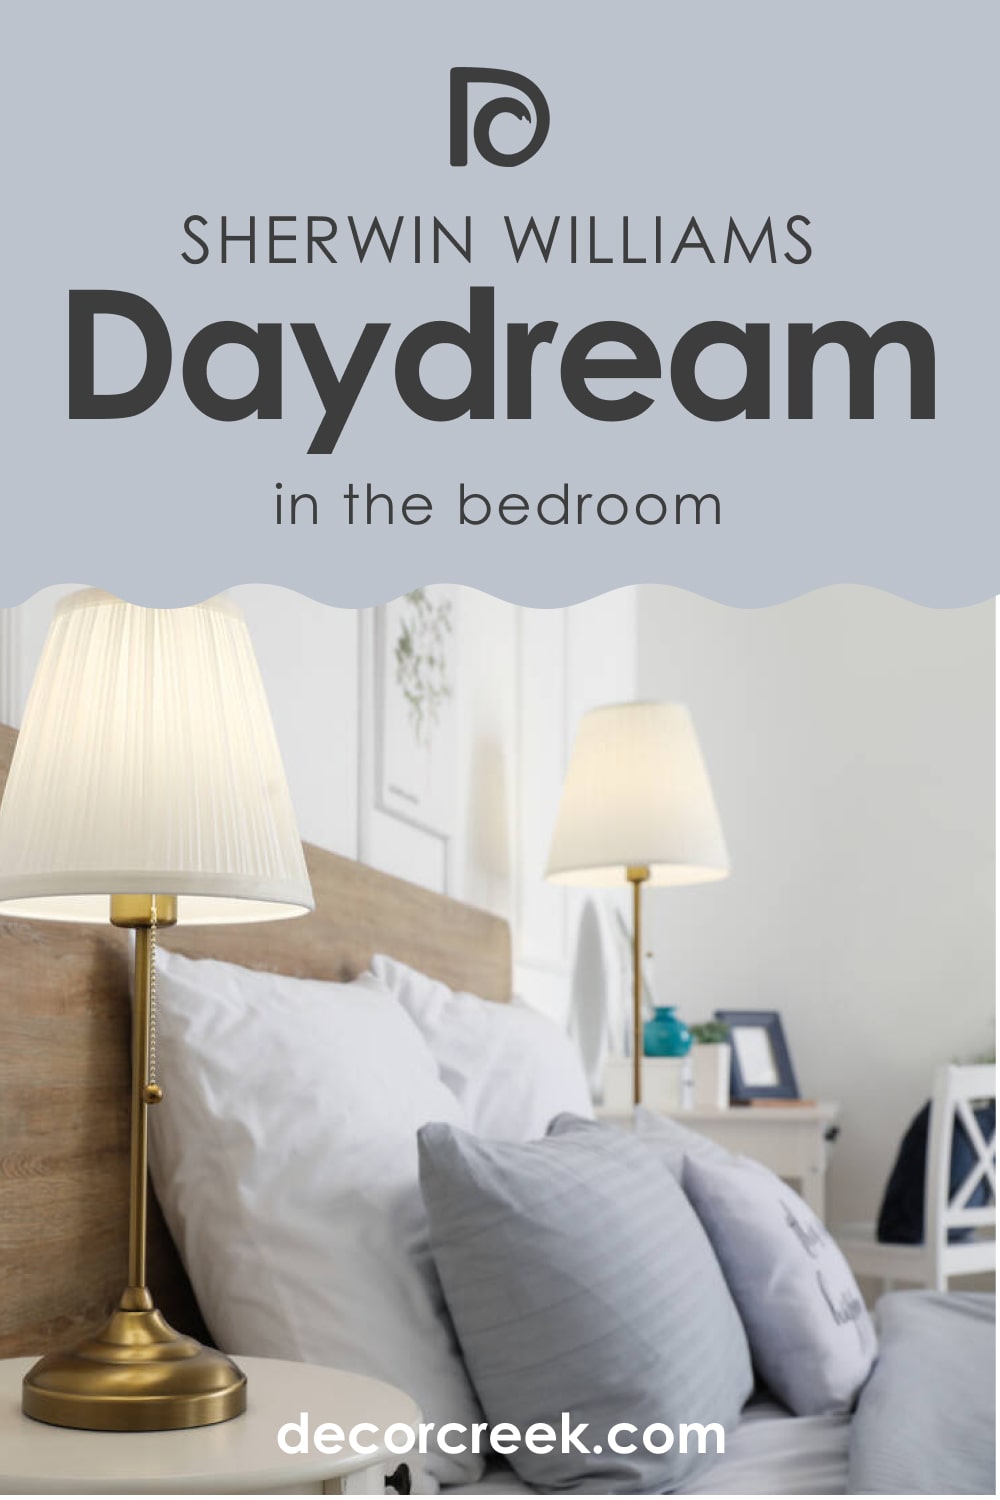 Daydream SW-6541 in a Bedroom